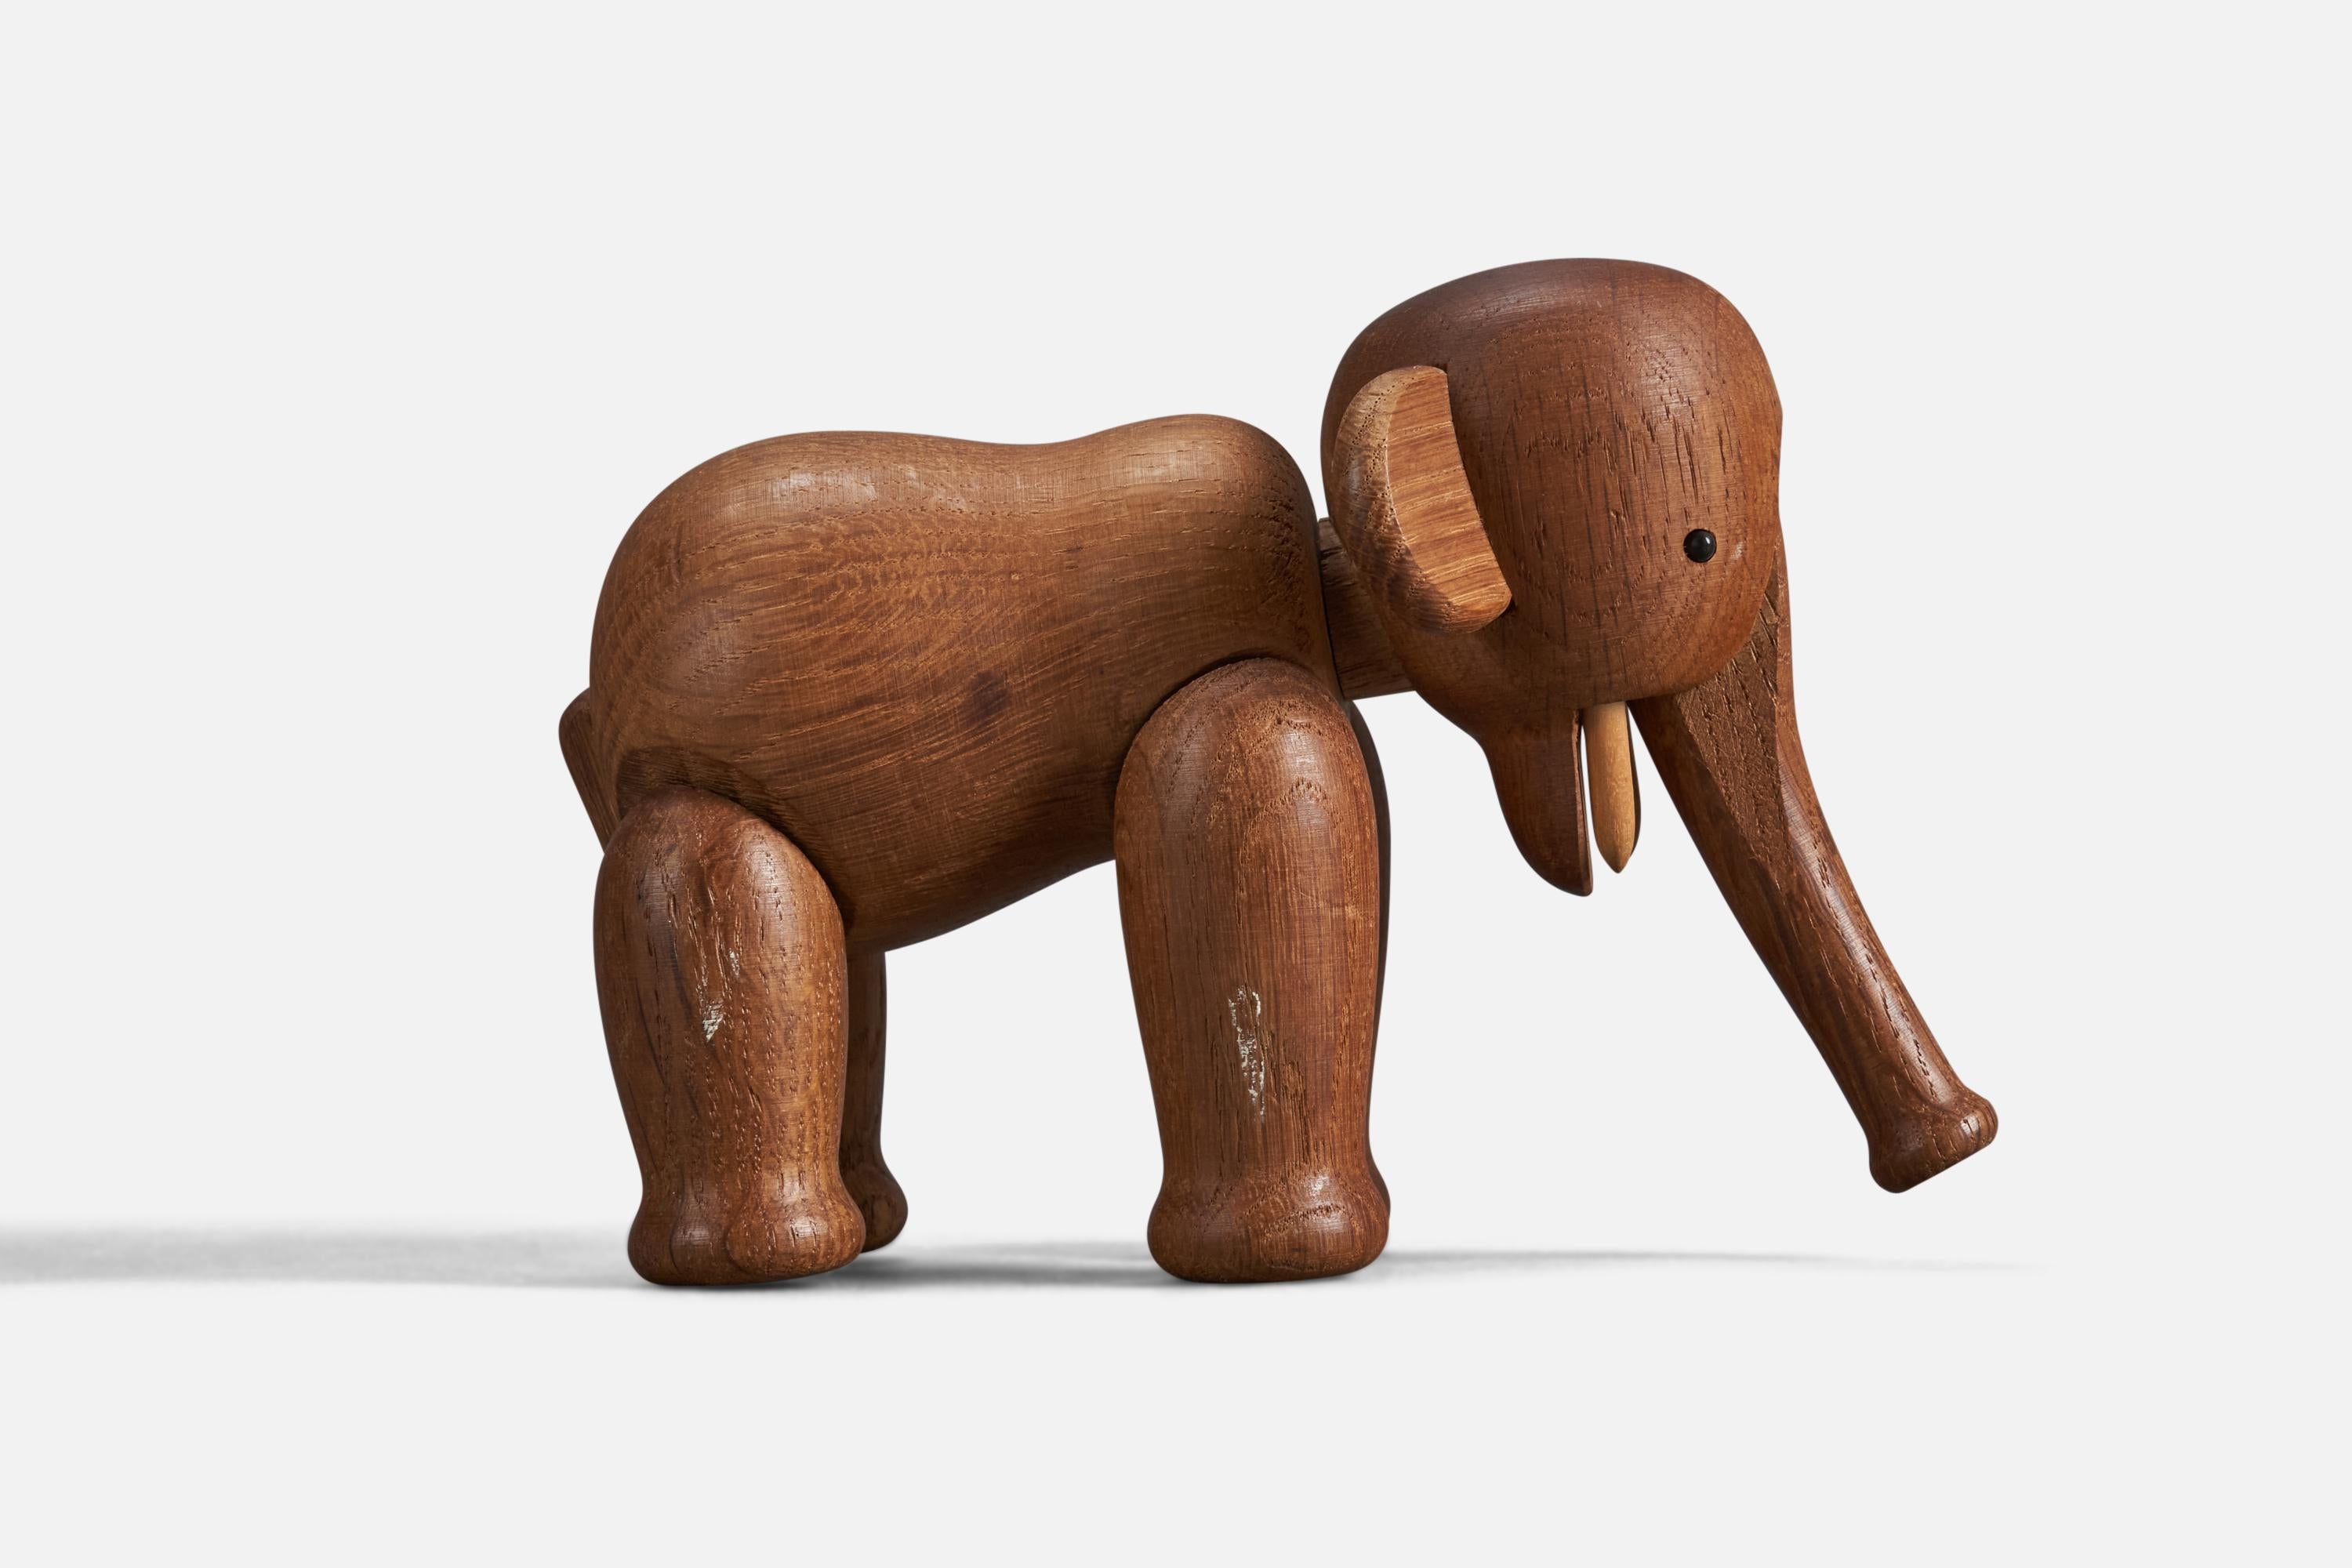 A teak toy or animal sculpture designed by Kay Bojesen, Denmark, 1950s.

Dimensions variable, measured as illustrated in first image.